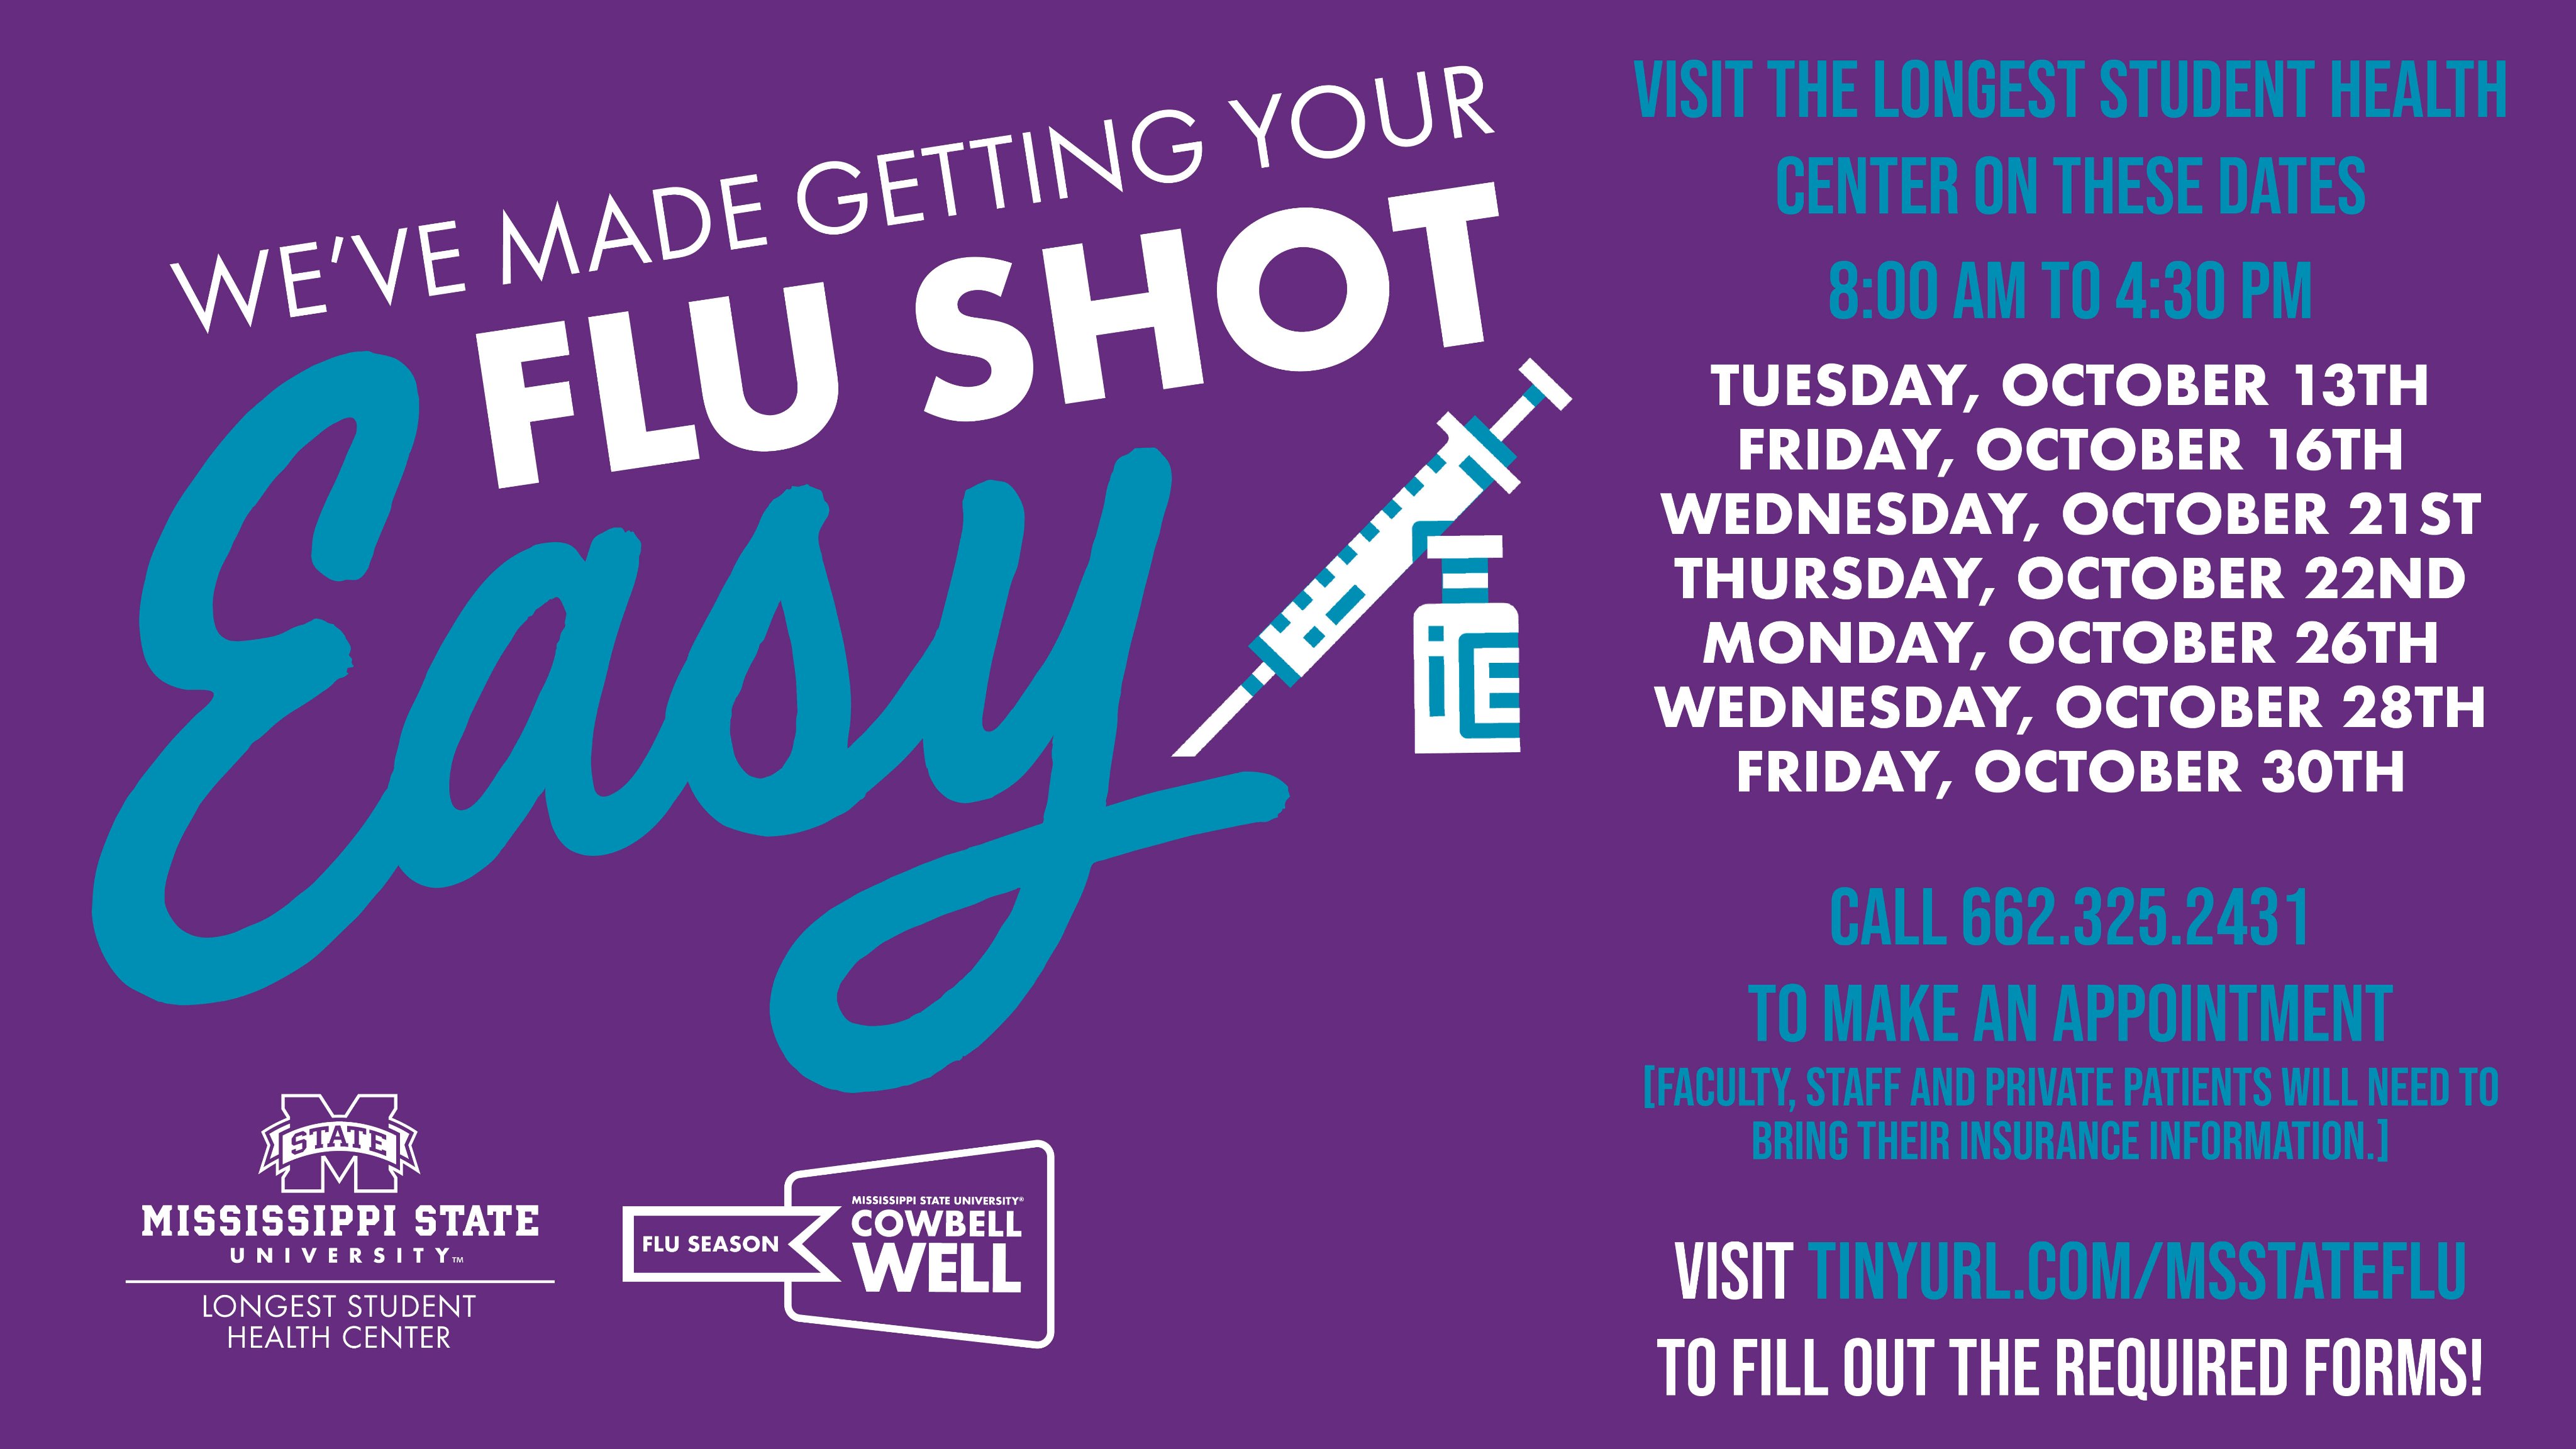 Blue and purple graphic promoting flu shot clinics for MSU students and employees